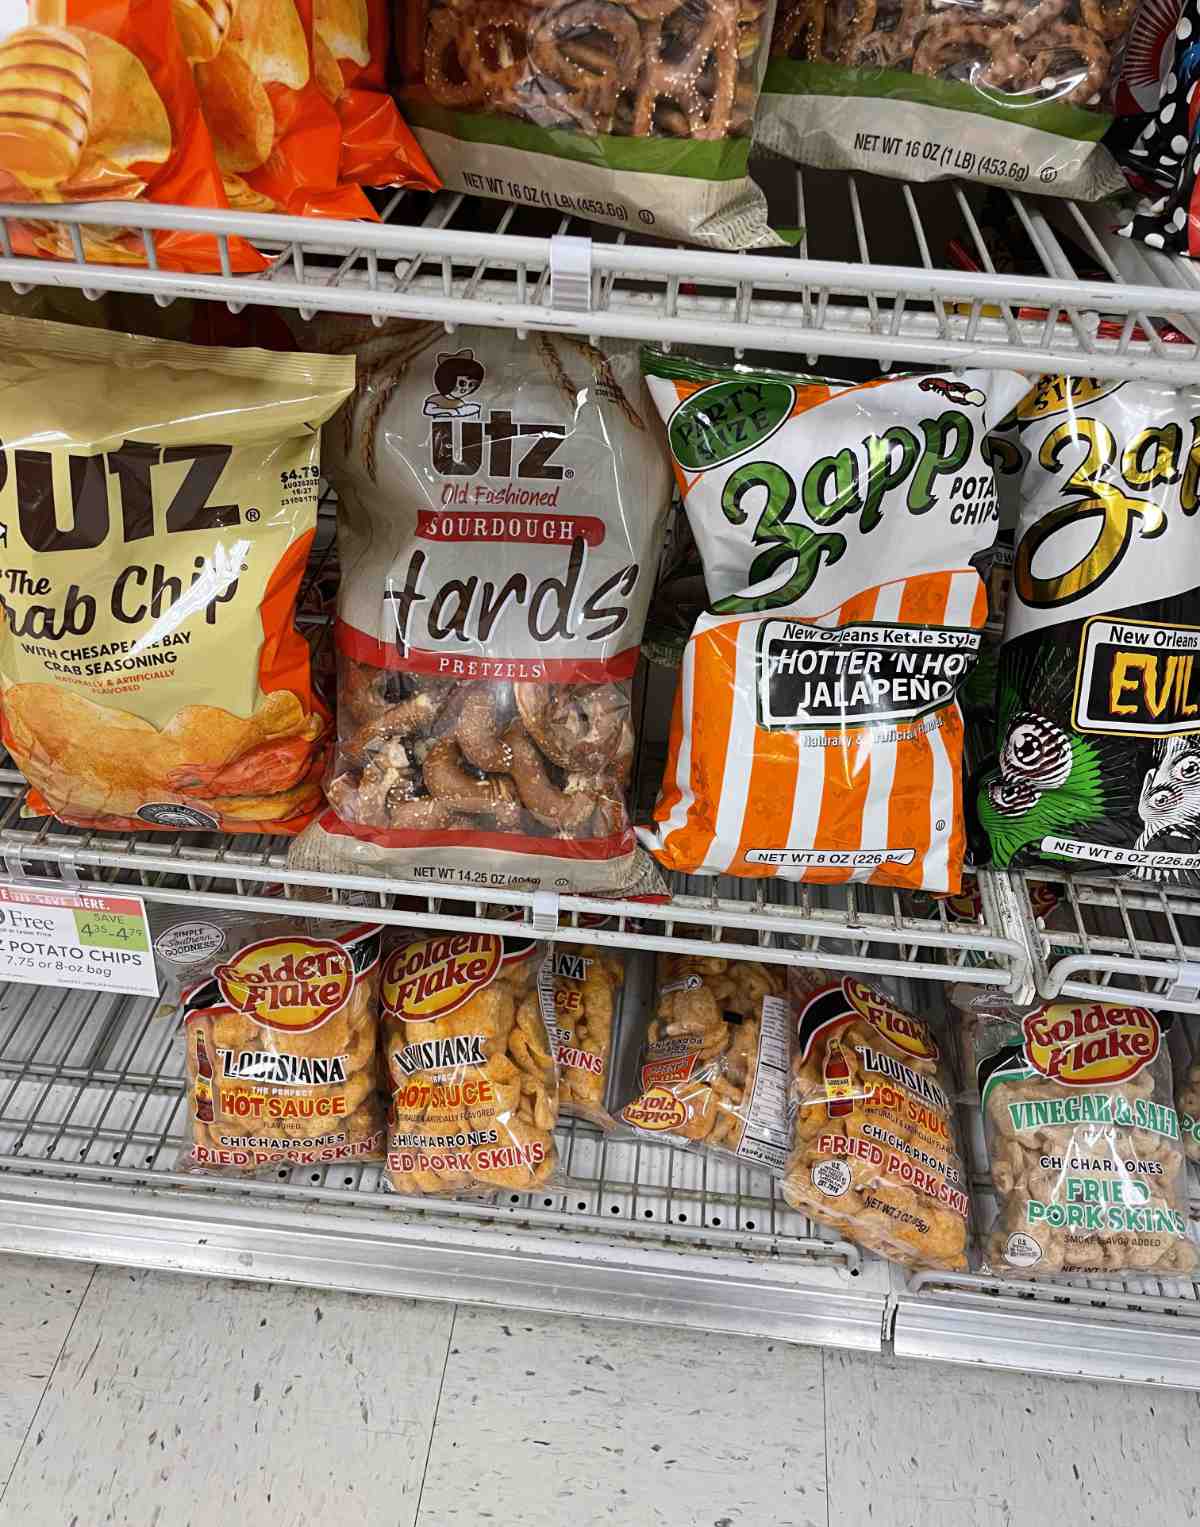 My high ass spent a solid few minutes thinking utz had just stopped caring